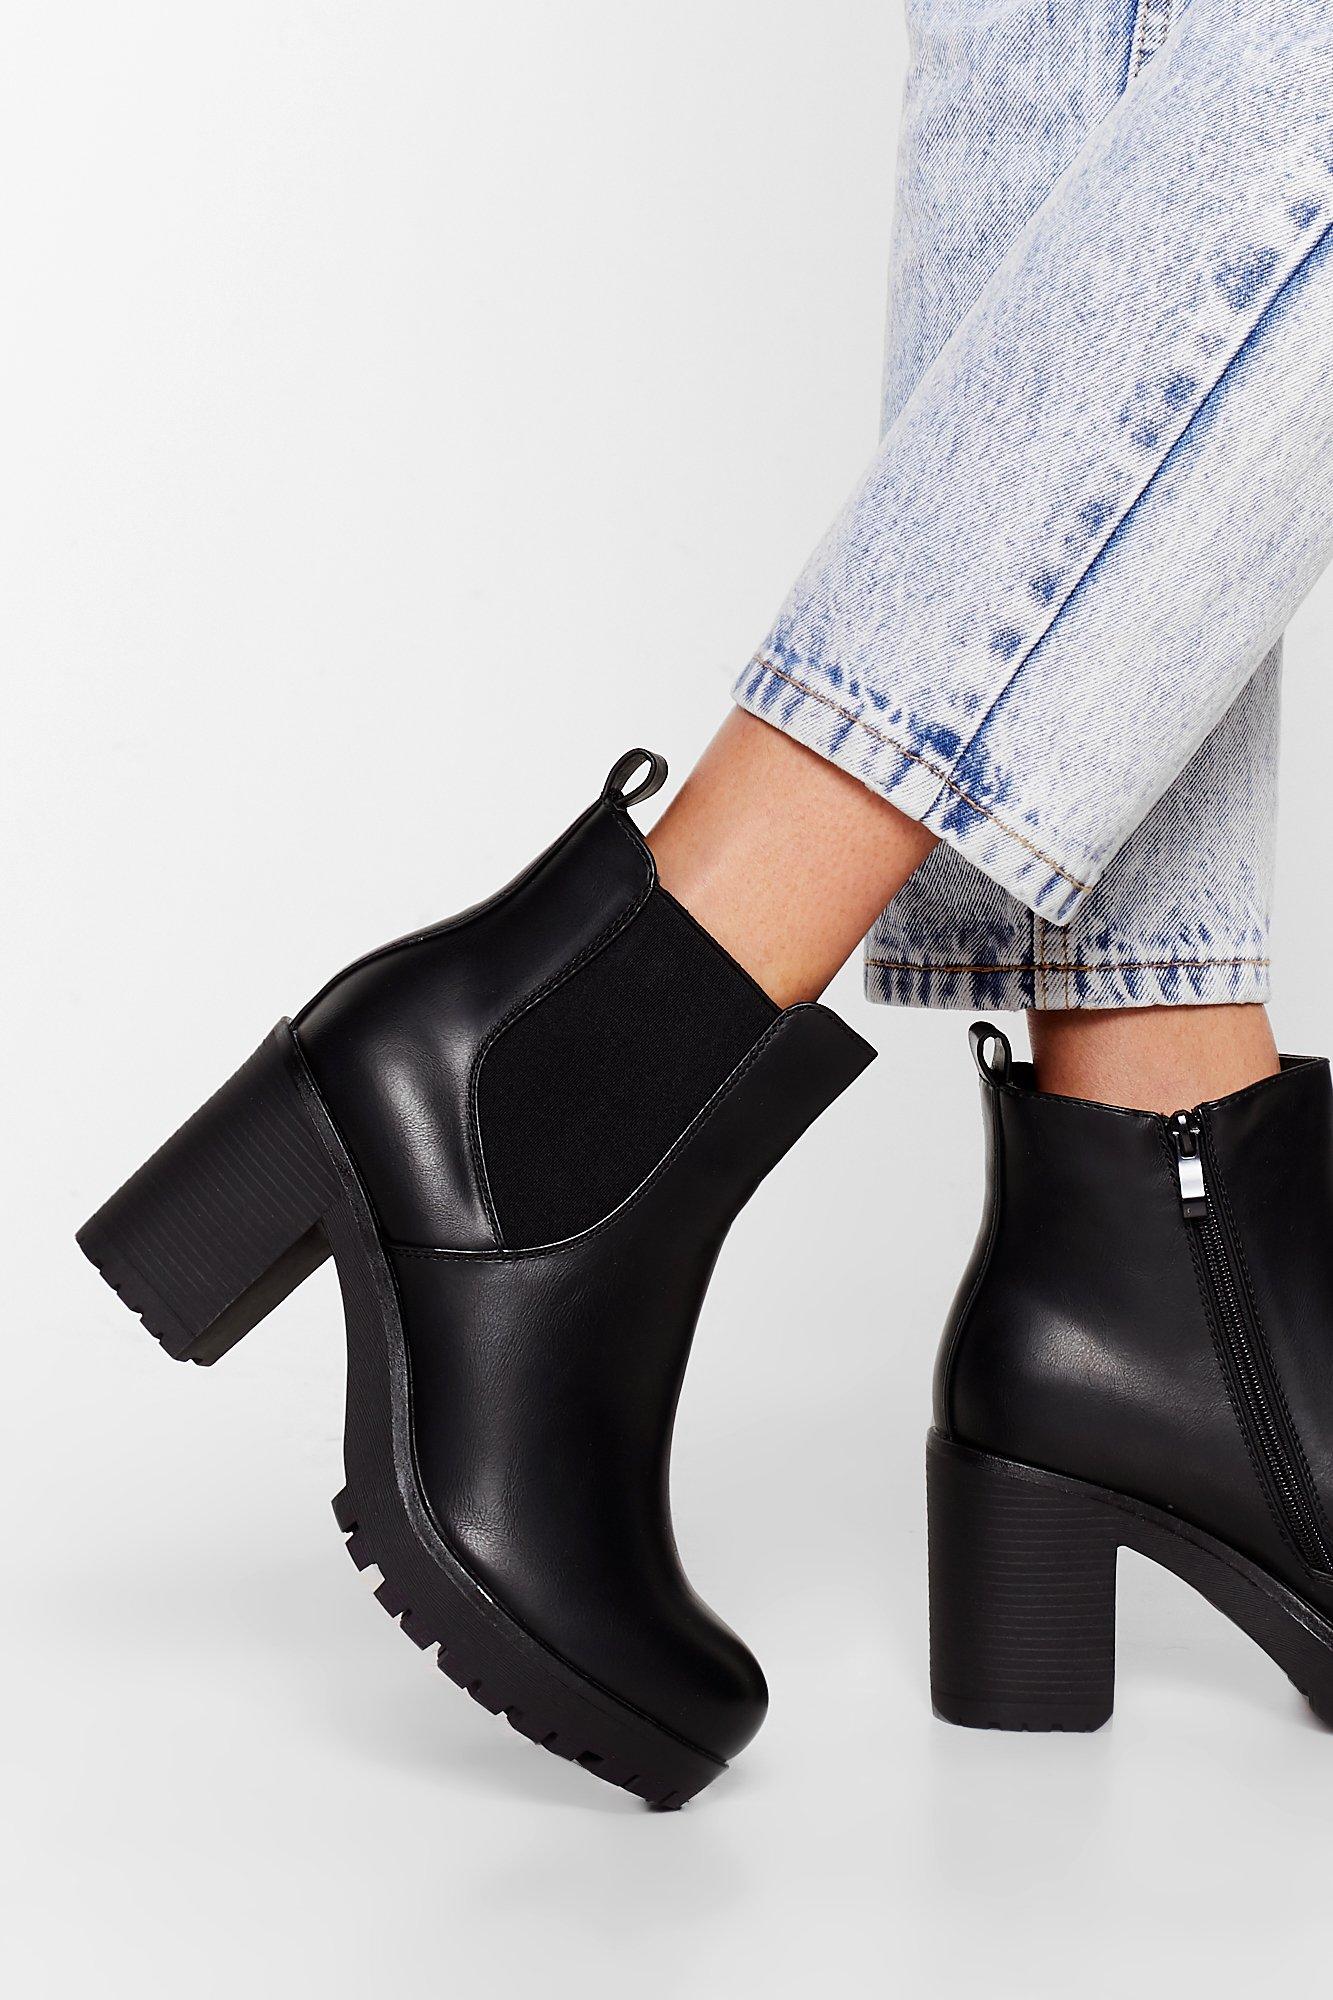 Shoes That Girl Heeled Ankle Boots 